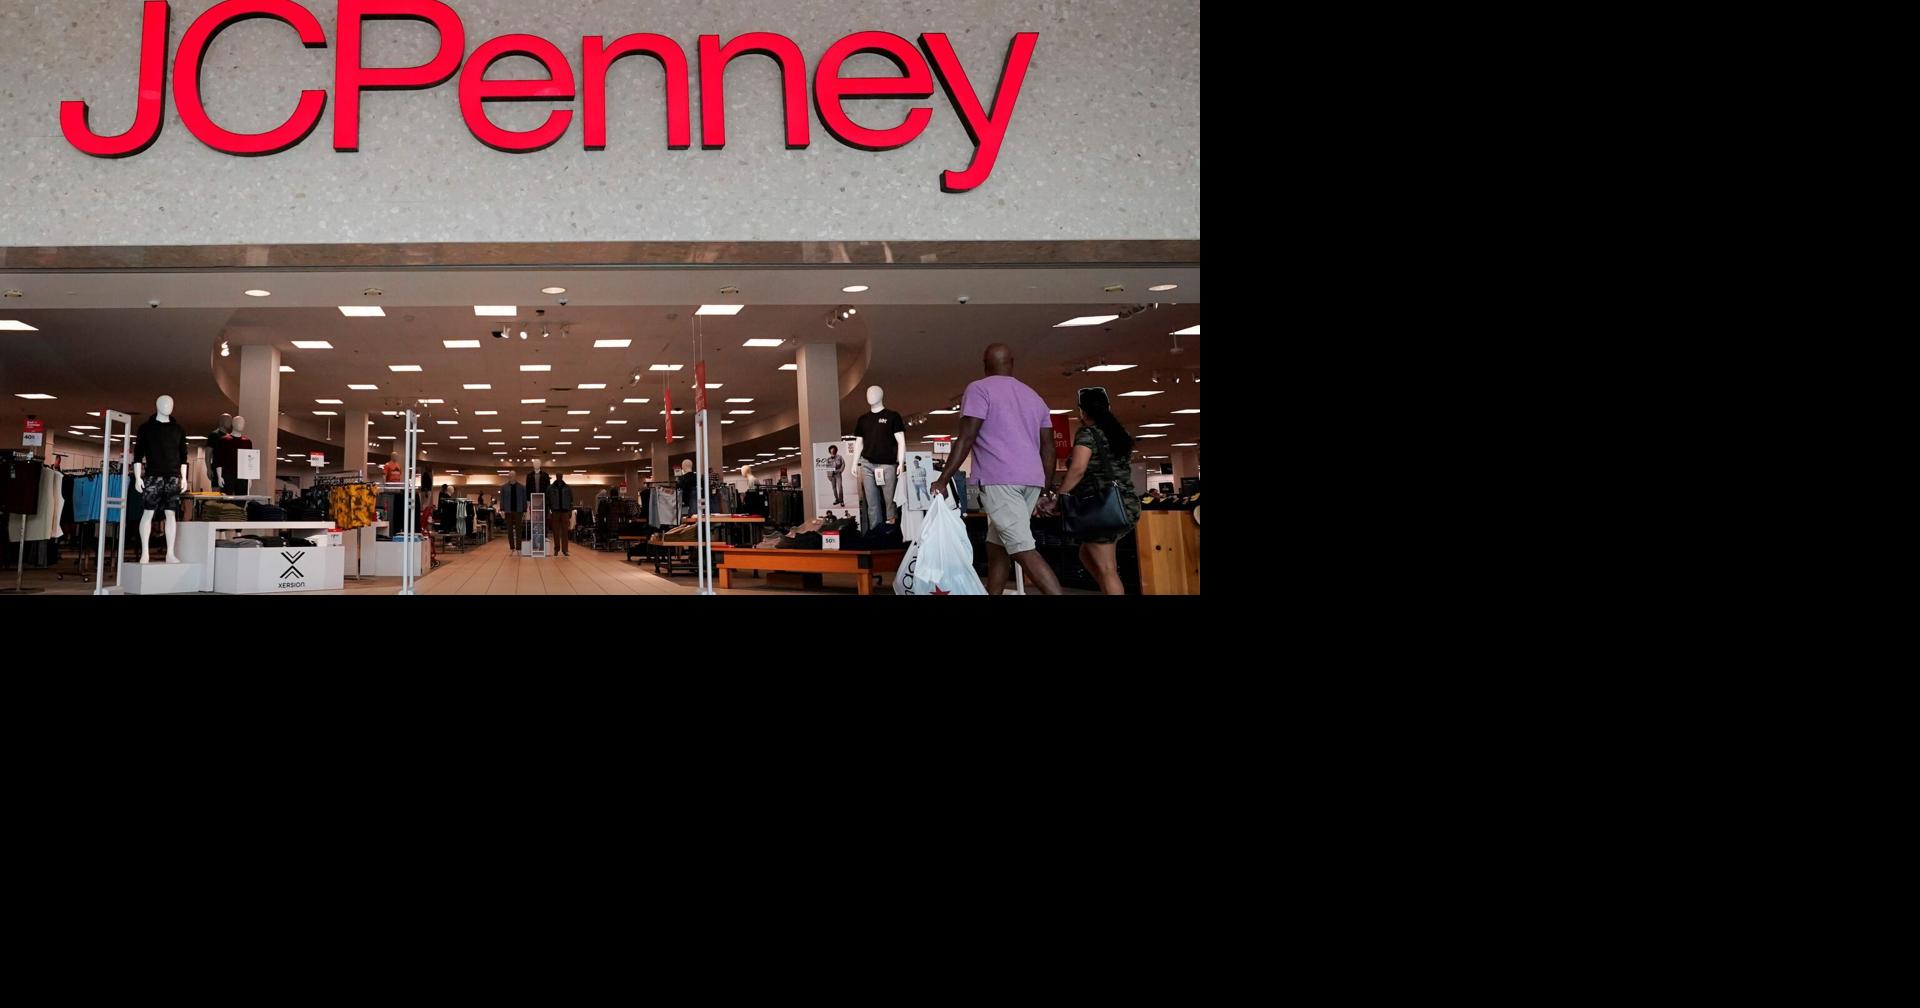 J.C. Penney rescue deal approved in bankruptcy court